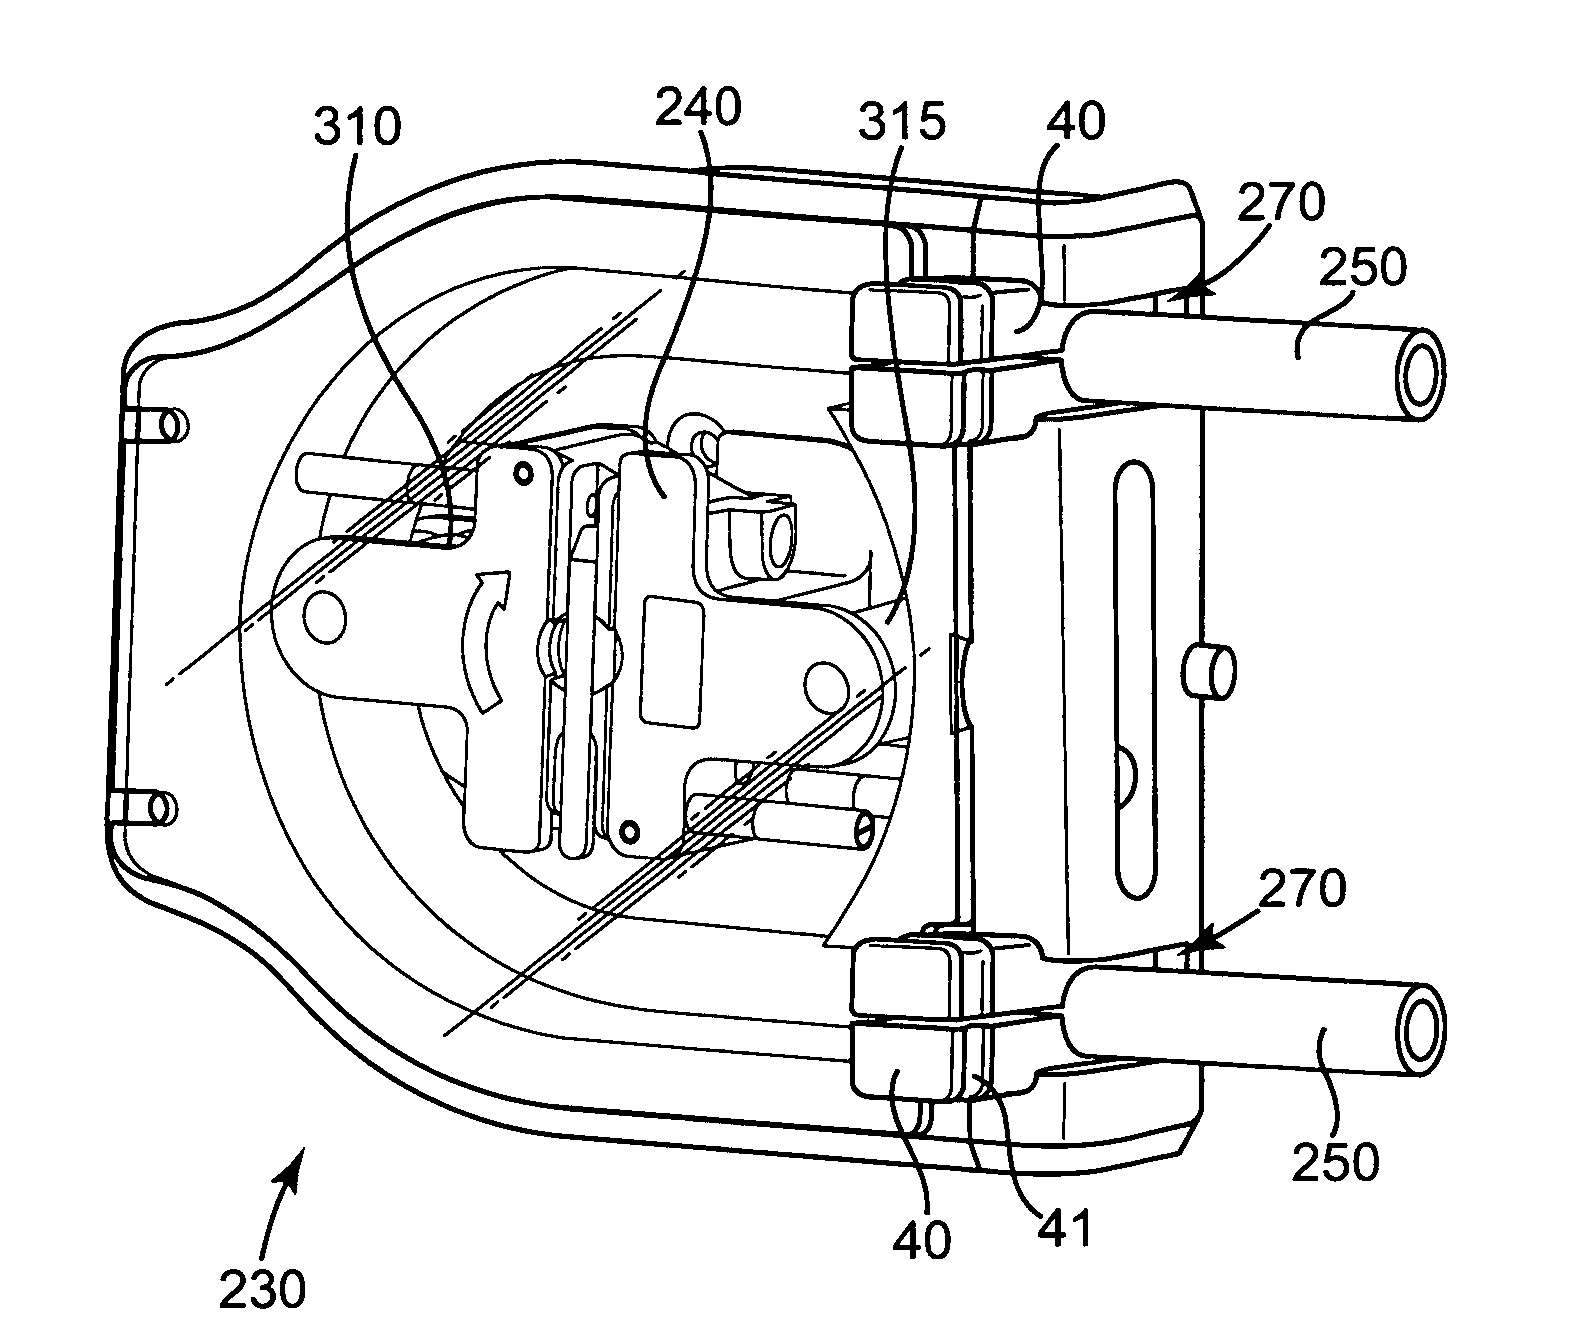 Tubing holding device for roller pumps